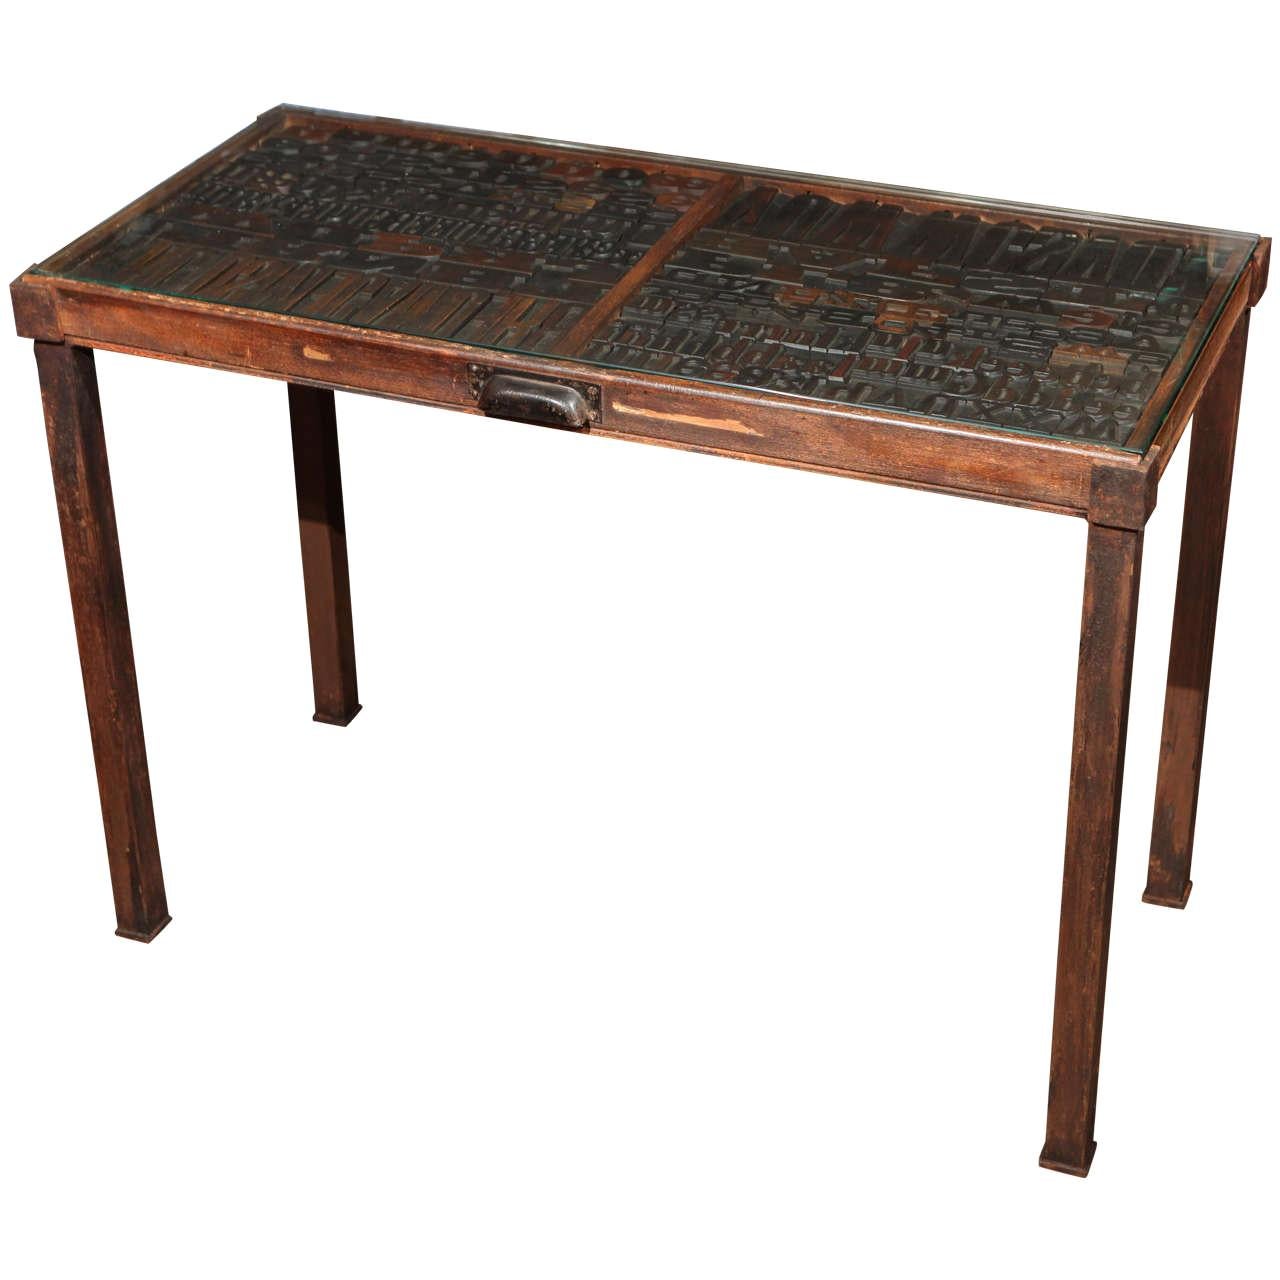 Late 19th Century Industrial Typeset Metal Table For Sale